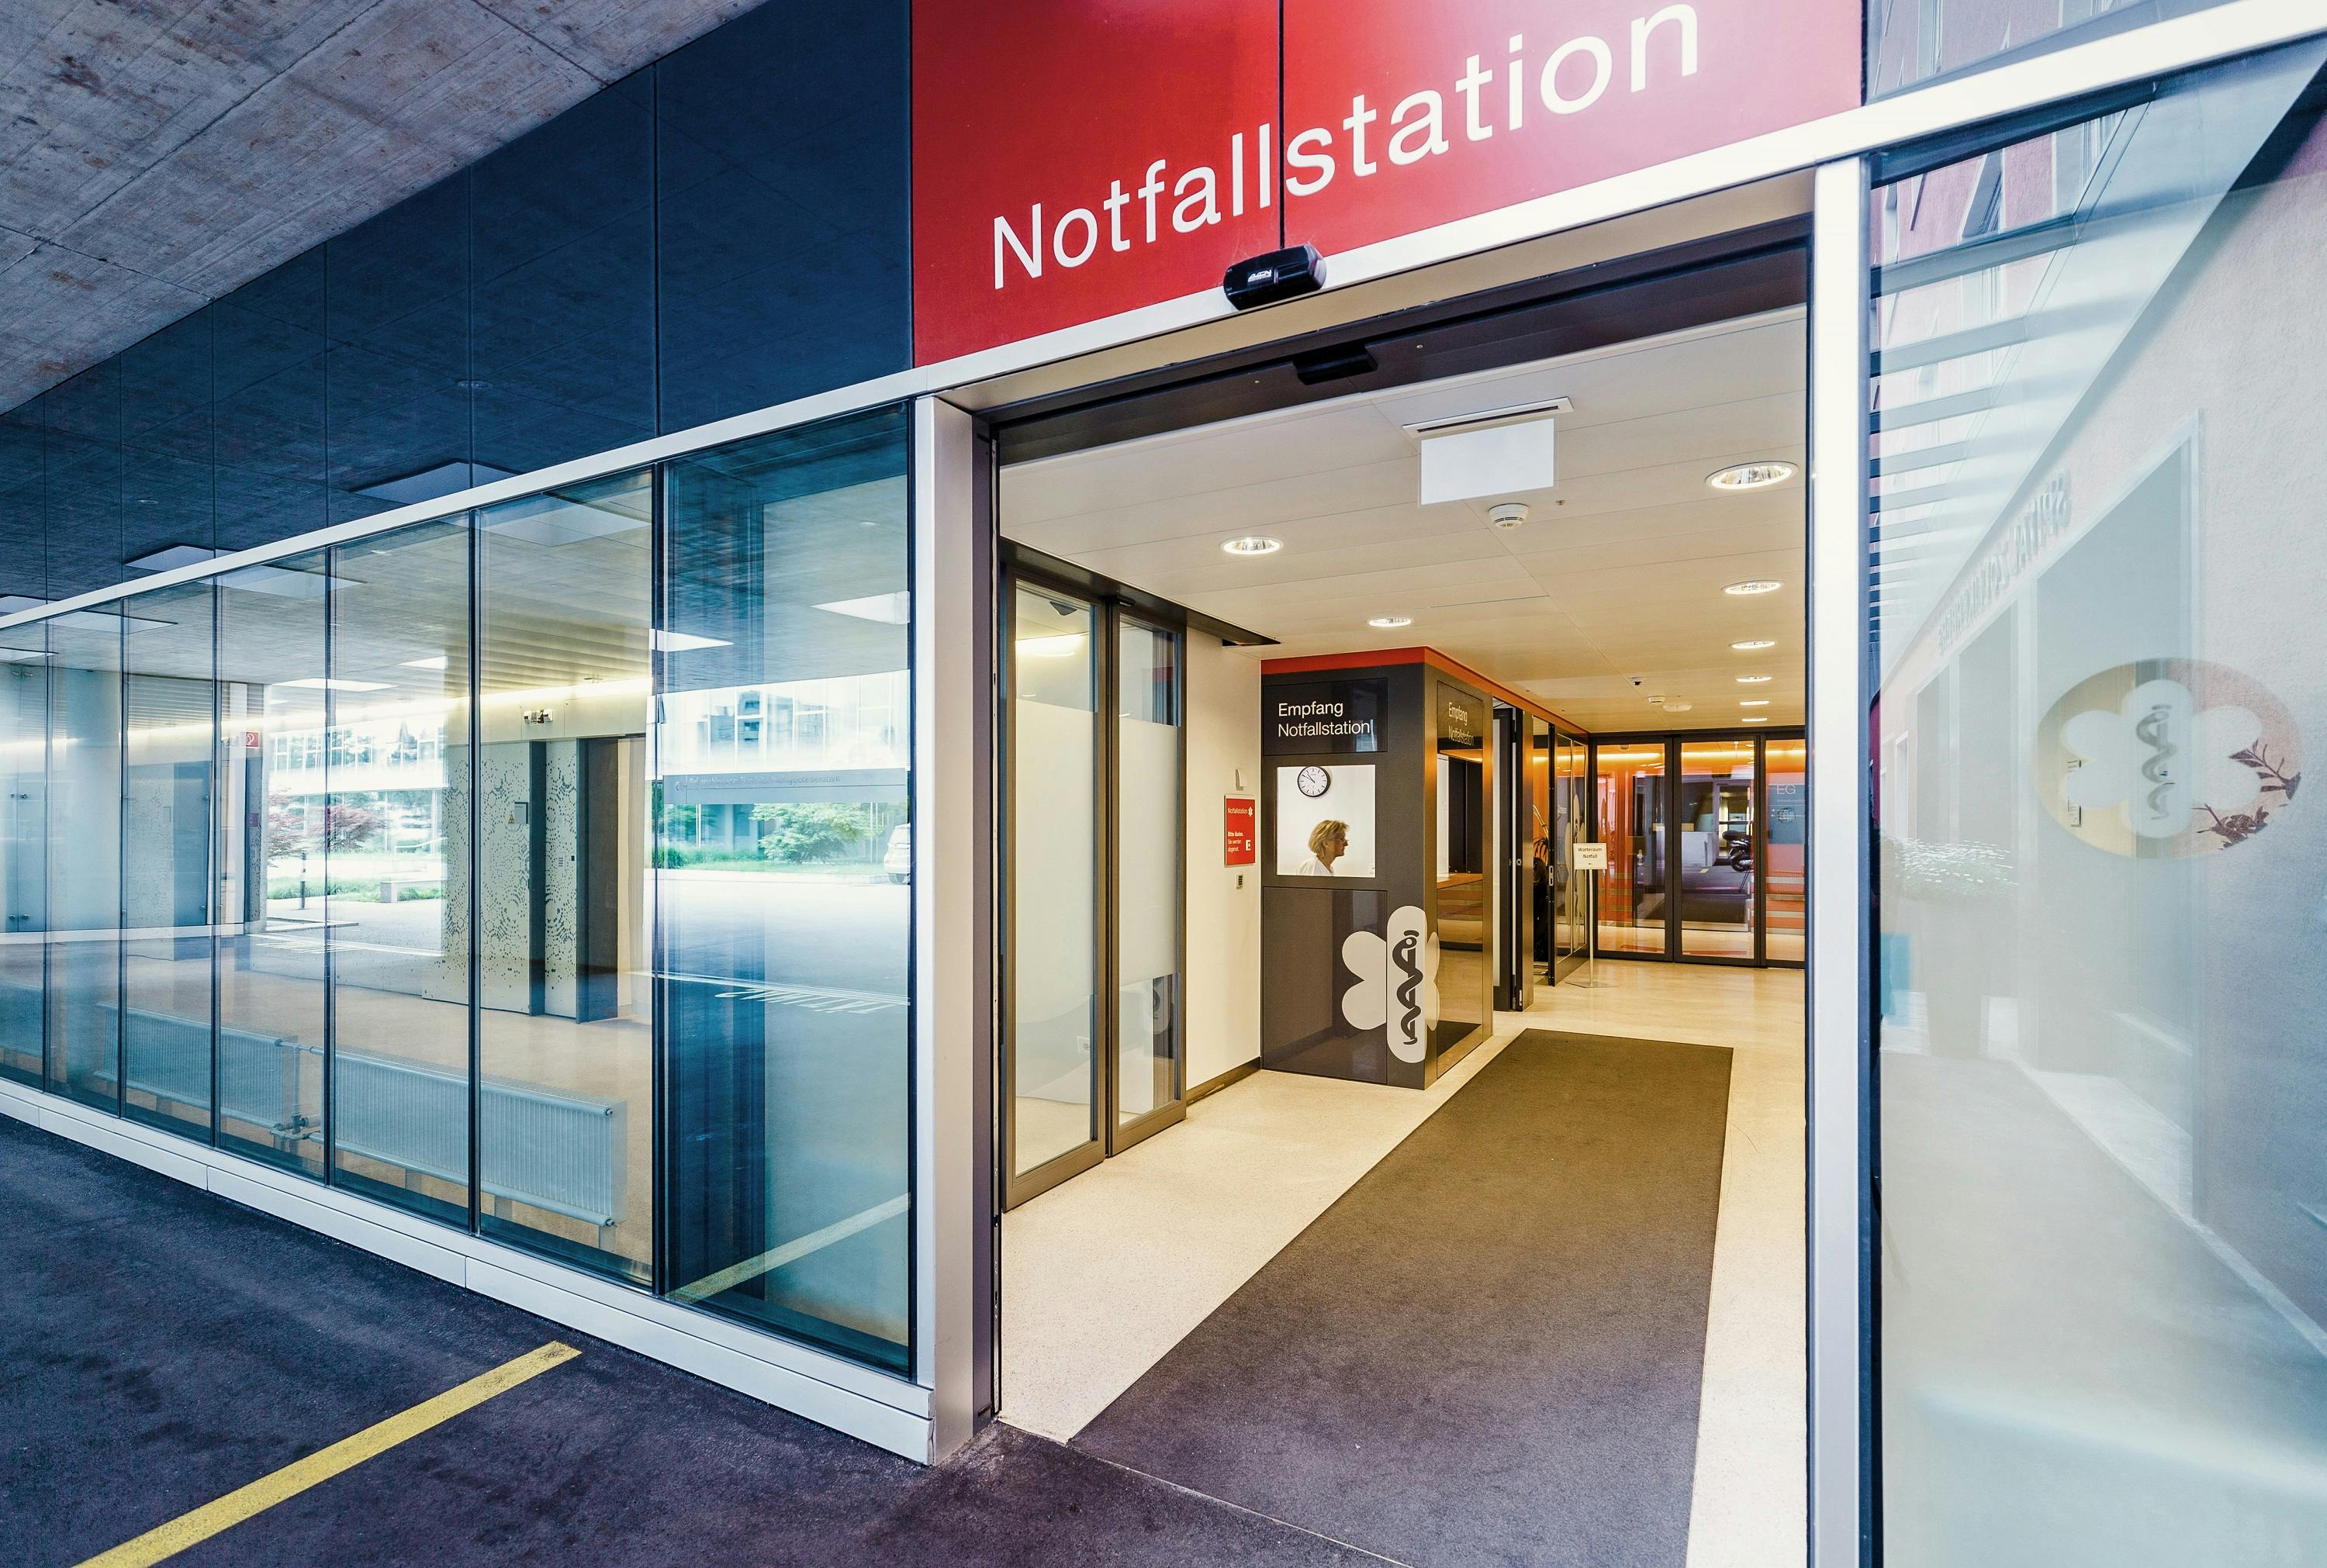 Entrance to the emergency ward of a hospital with open glass doors and red sign.